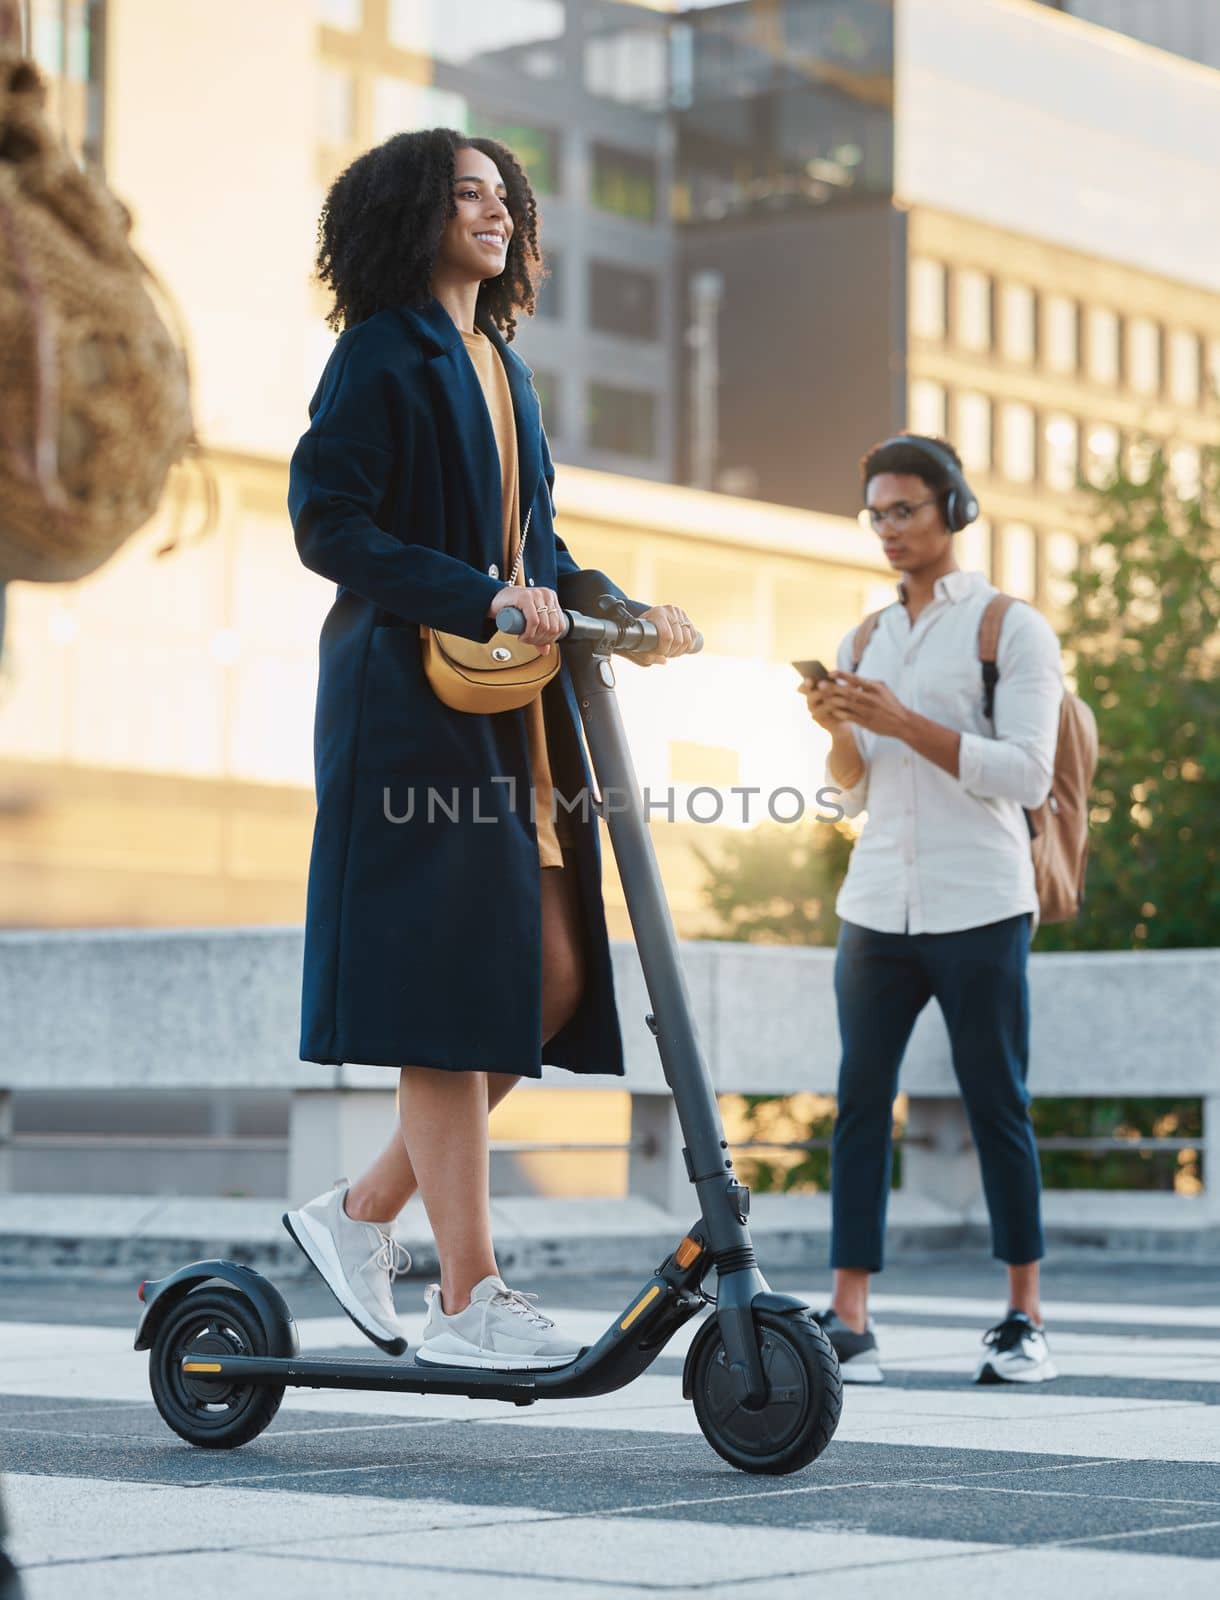 Scooter, city and business woman going to work with an electric vehicle on an outdoor street in Mexico. Travel, happy and professional female corporate manager commuting to the office in urban town